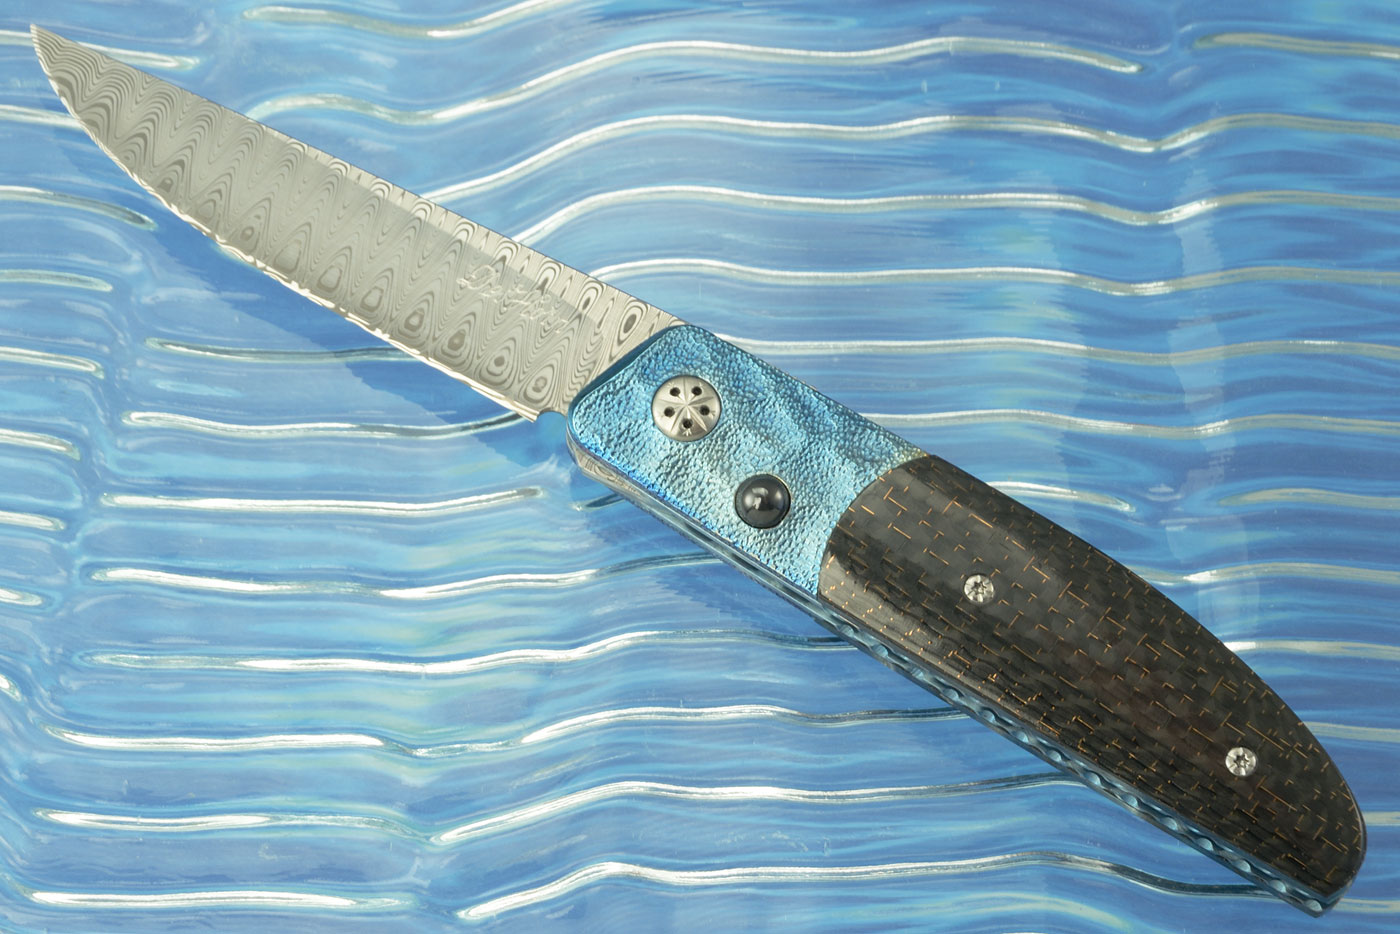 Small Ball Release Front Flipper with Damasteel and Lightning Strike Carbon Fiber